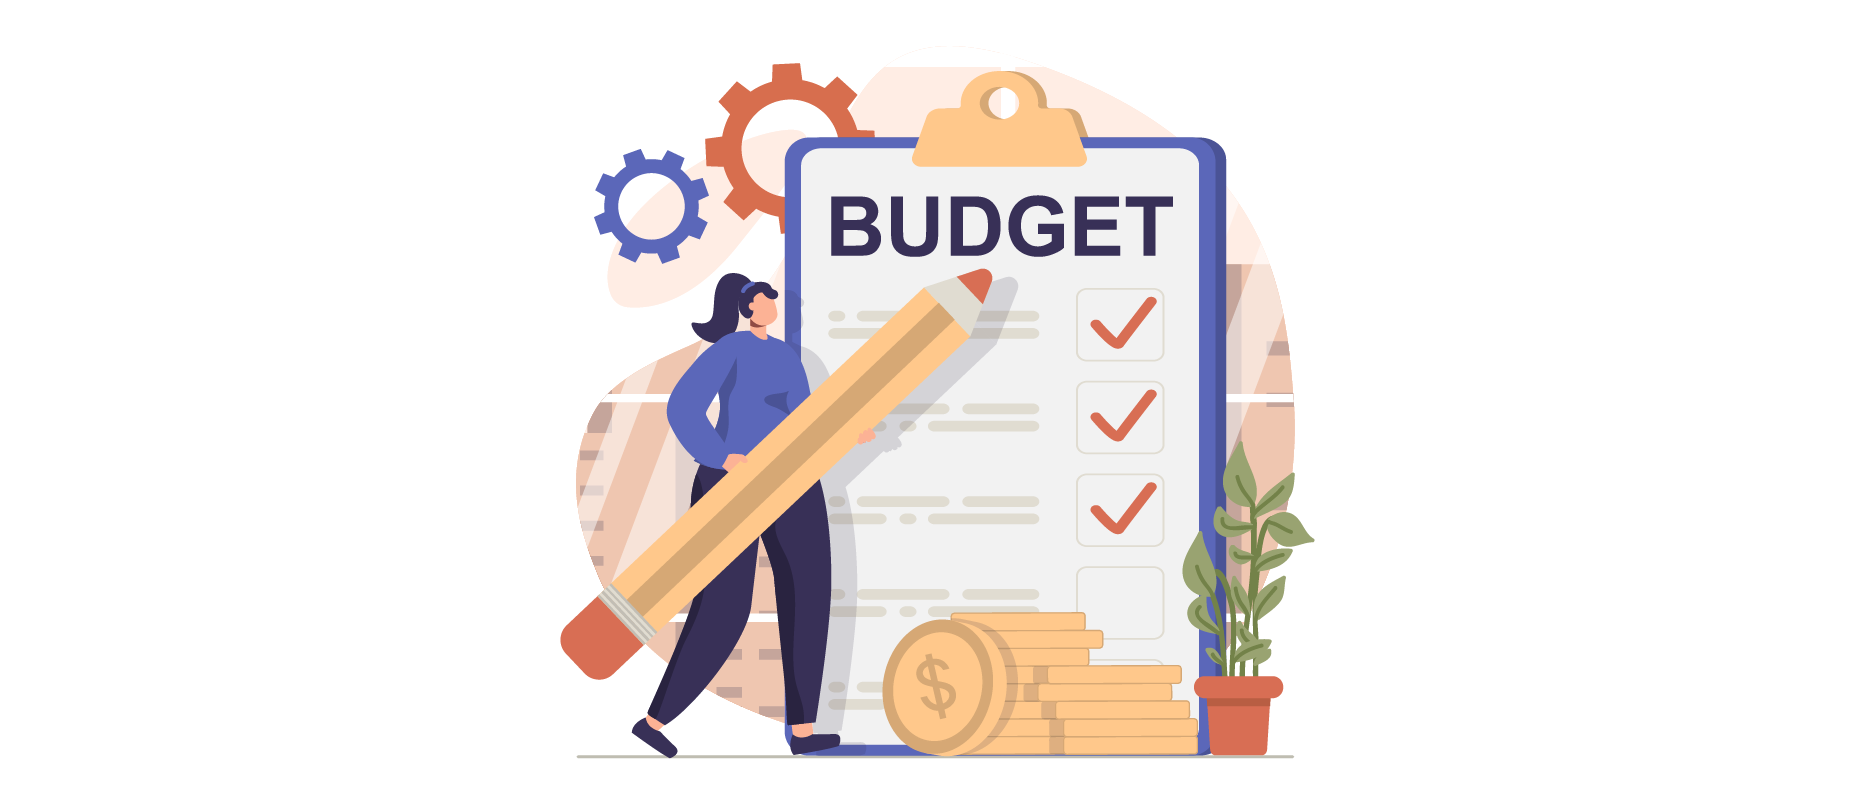 prospect budget for new software